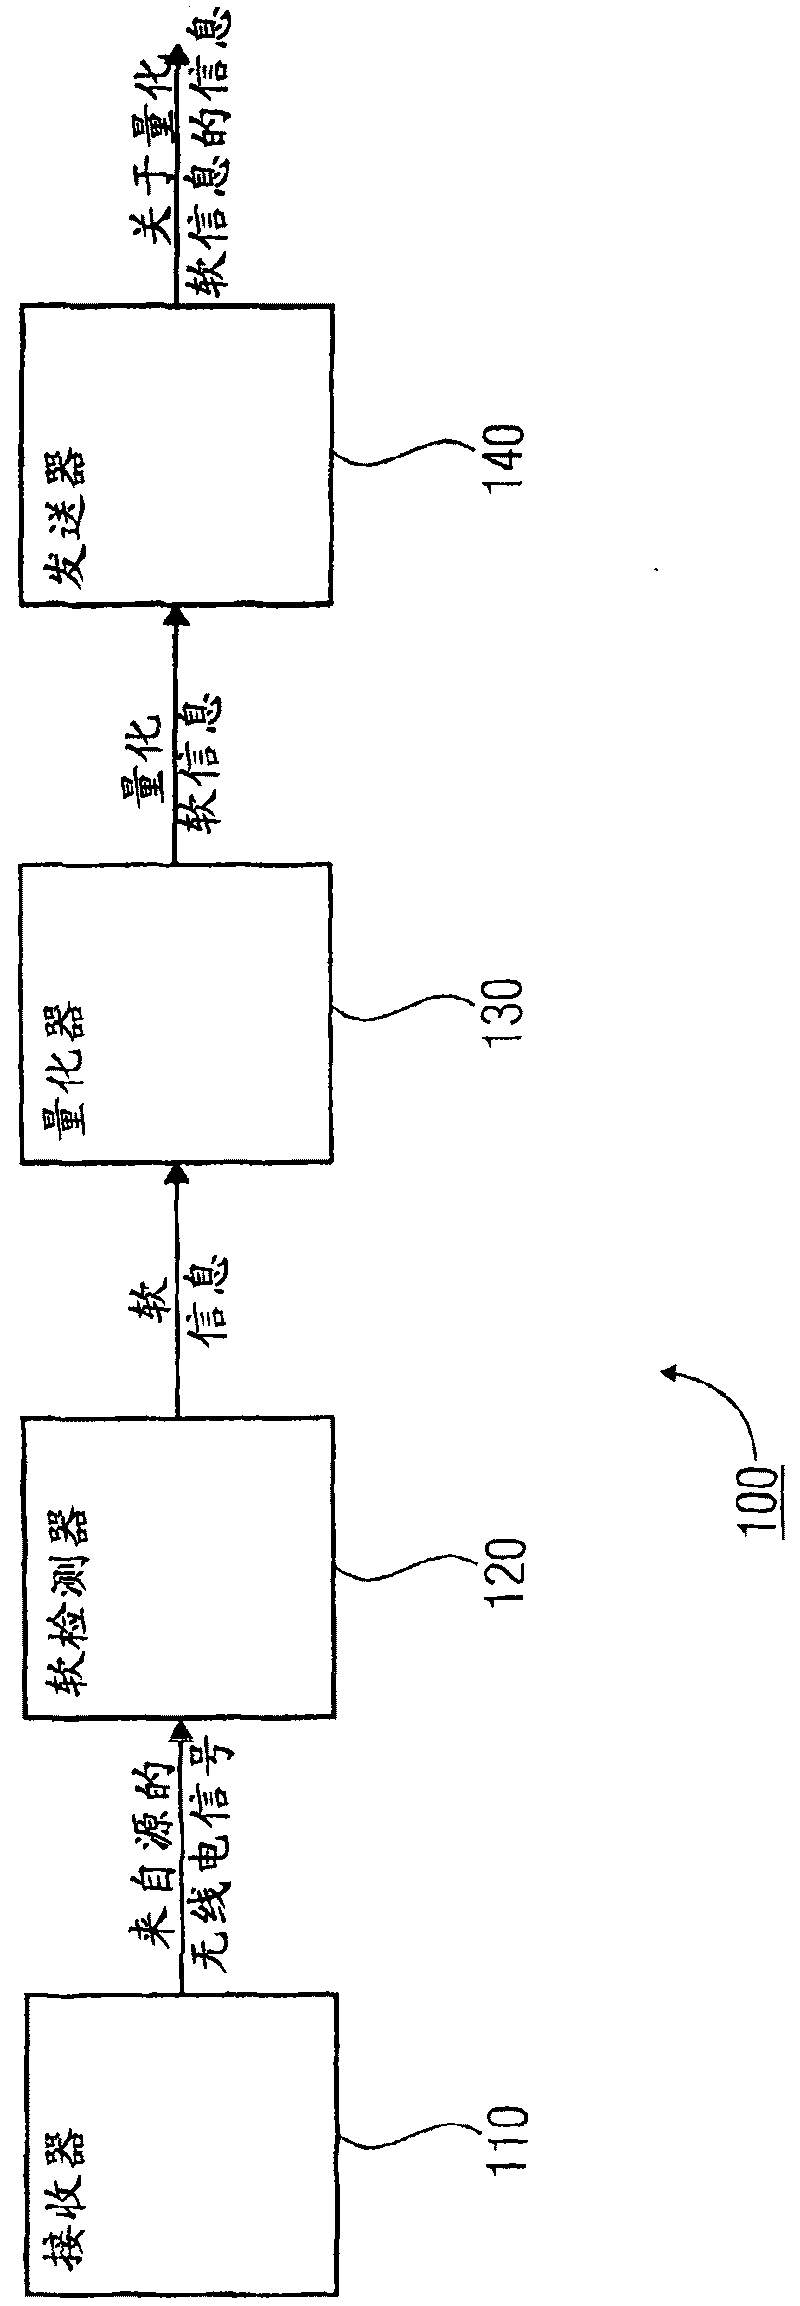 Relay station for a mobile communication system